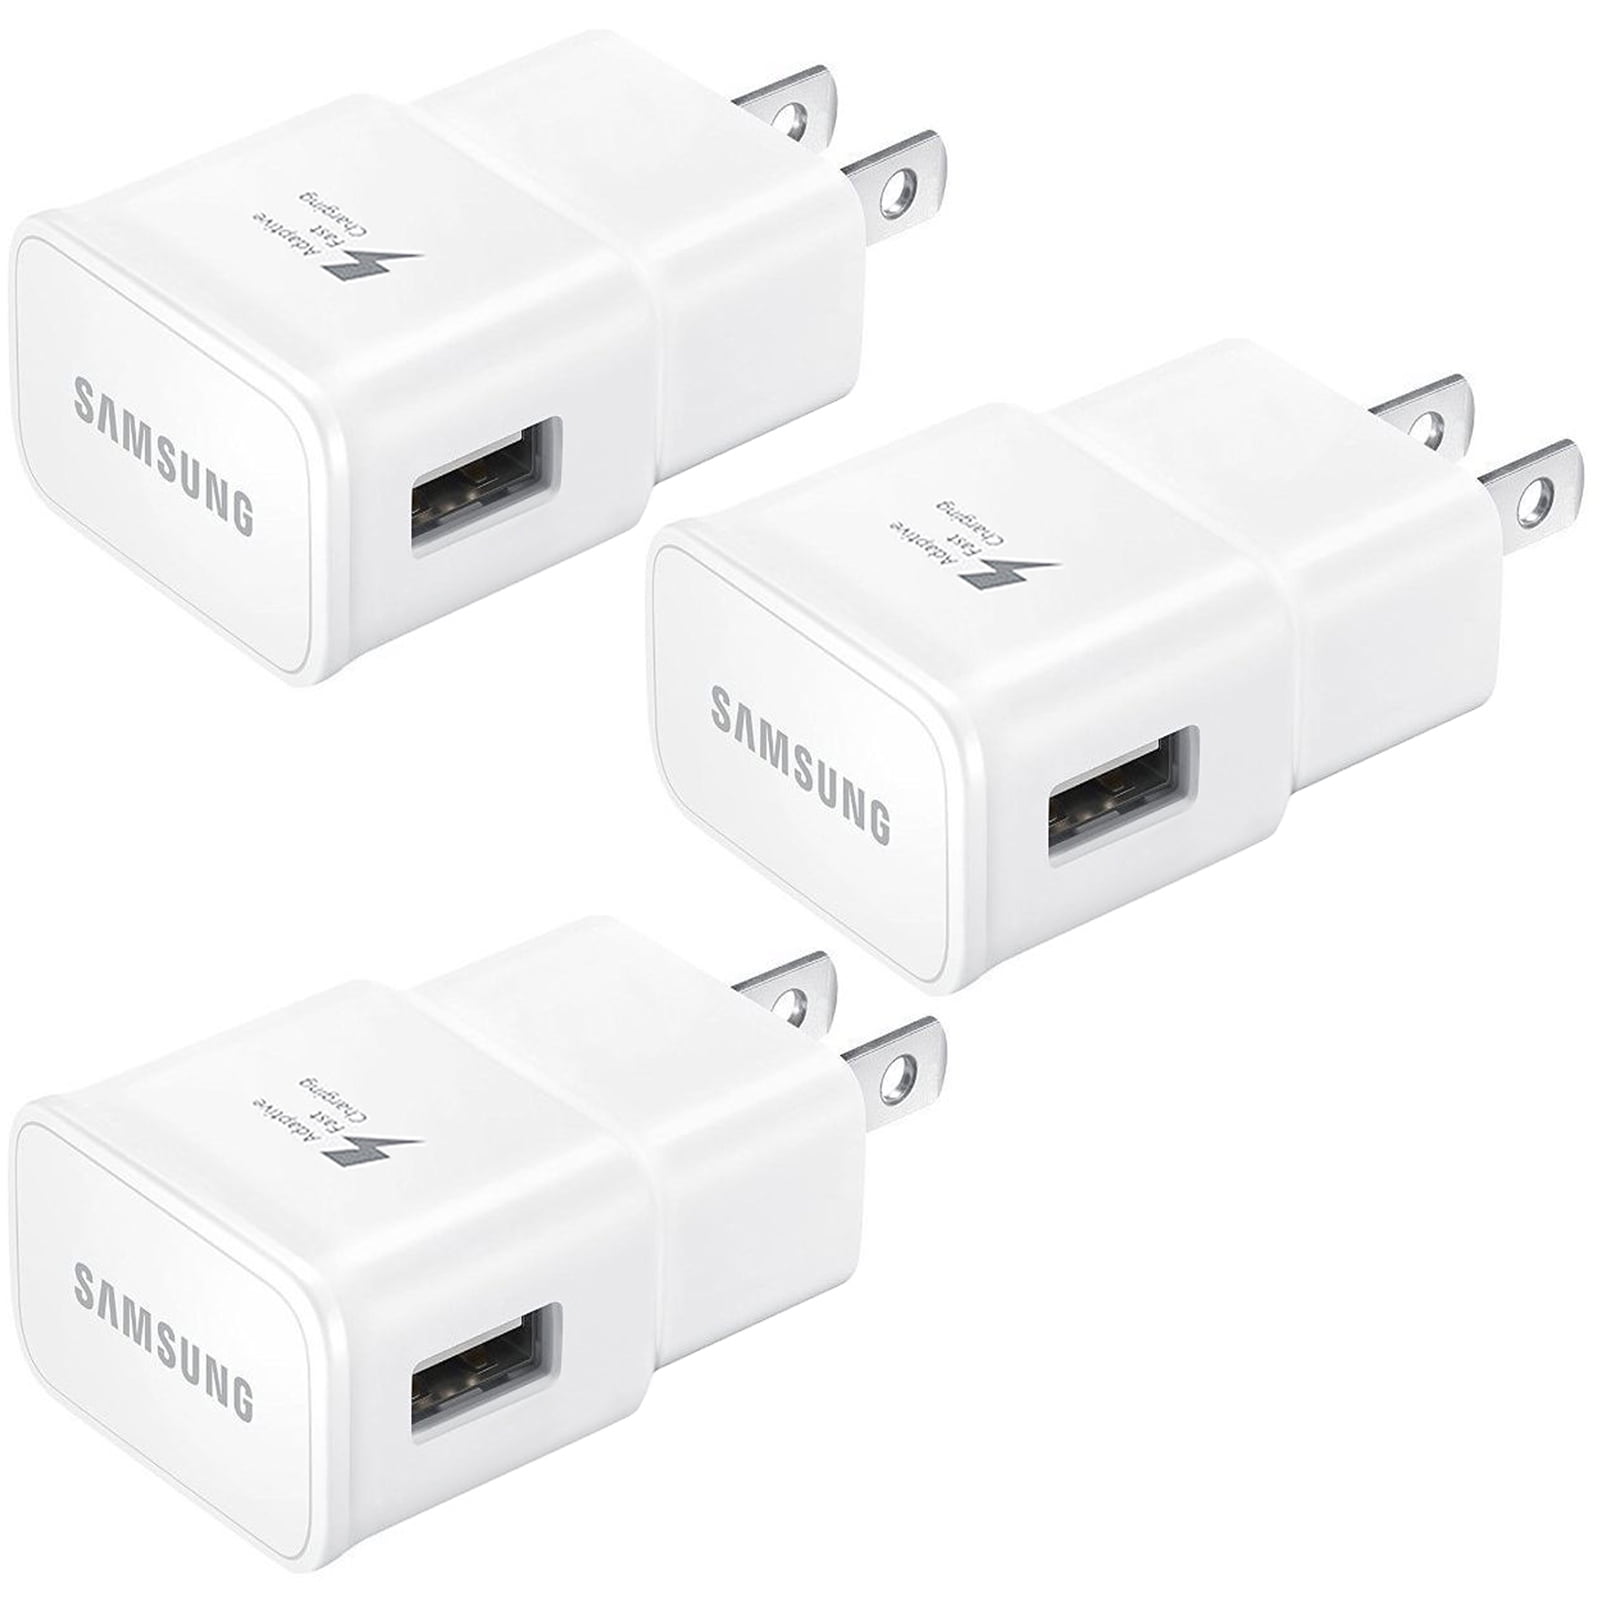 Uitbreiding Gearceerd Post impressionisme 3-Pack New OEM Samsung fast Adaptive Wall Charger for Galaxy S7 S6 Note 5 4  Edge EP-TA20JWS / ECB-DU4EWE For Samsung Galaxy S6 Edge S7 Edge S8 S8+ S9  S9+ Note 8